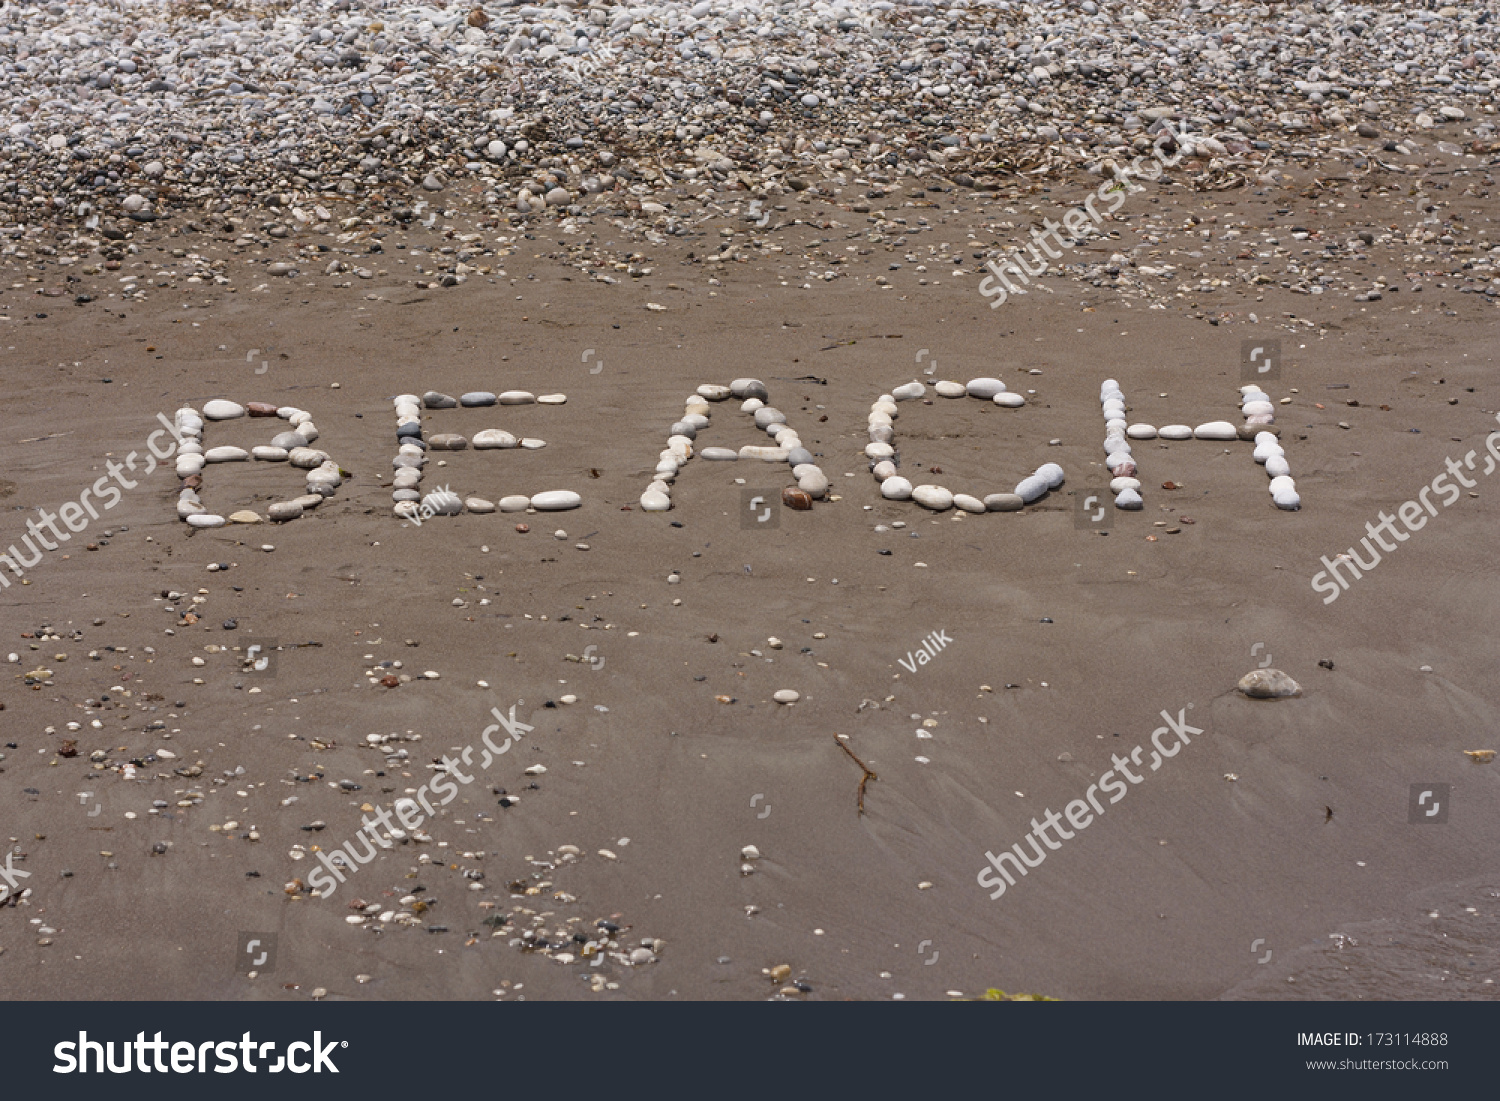 Stones sea background in wet sand of beach in sunny day photo #173114888